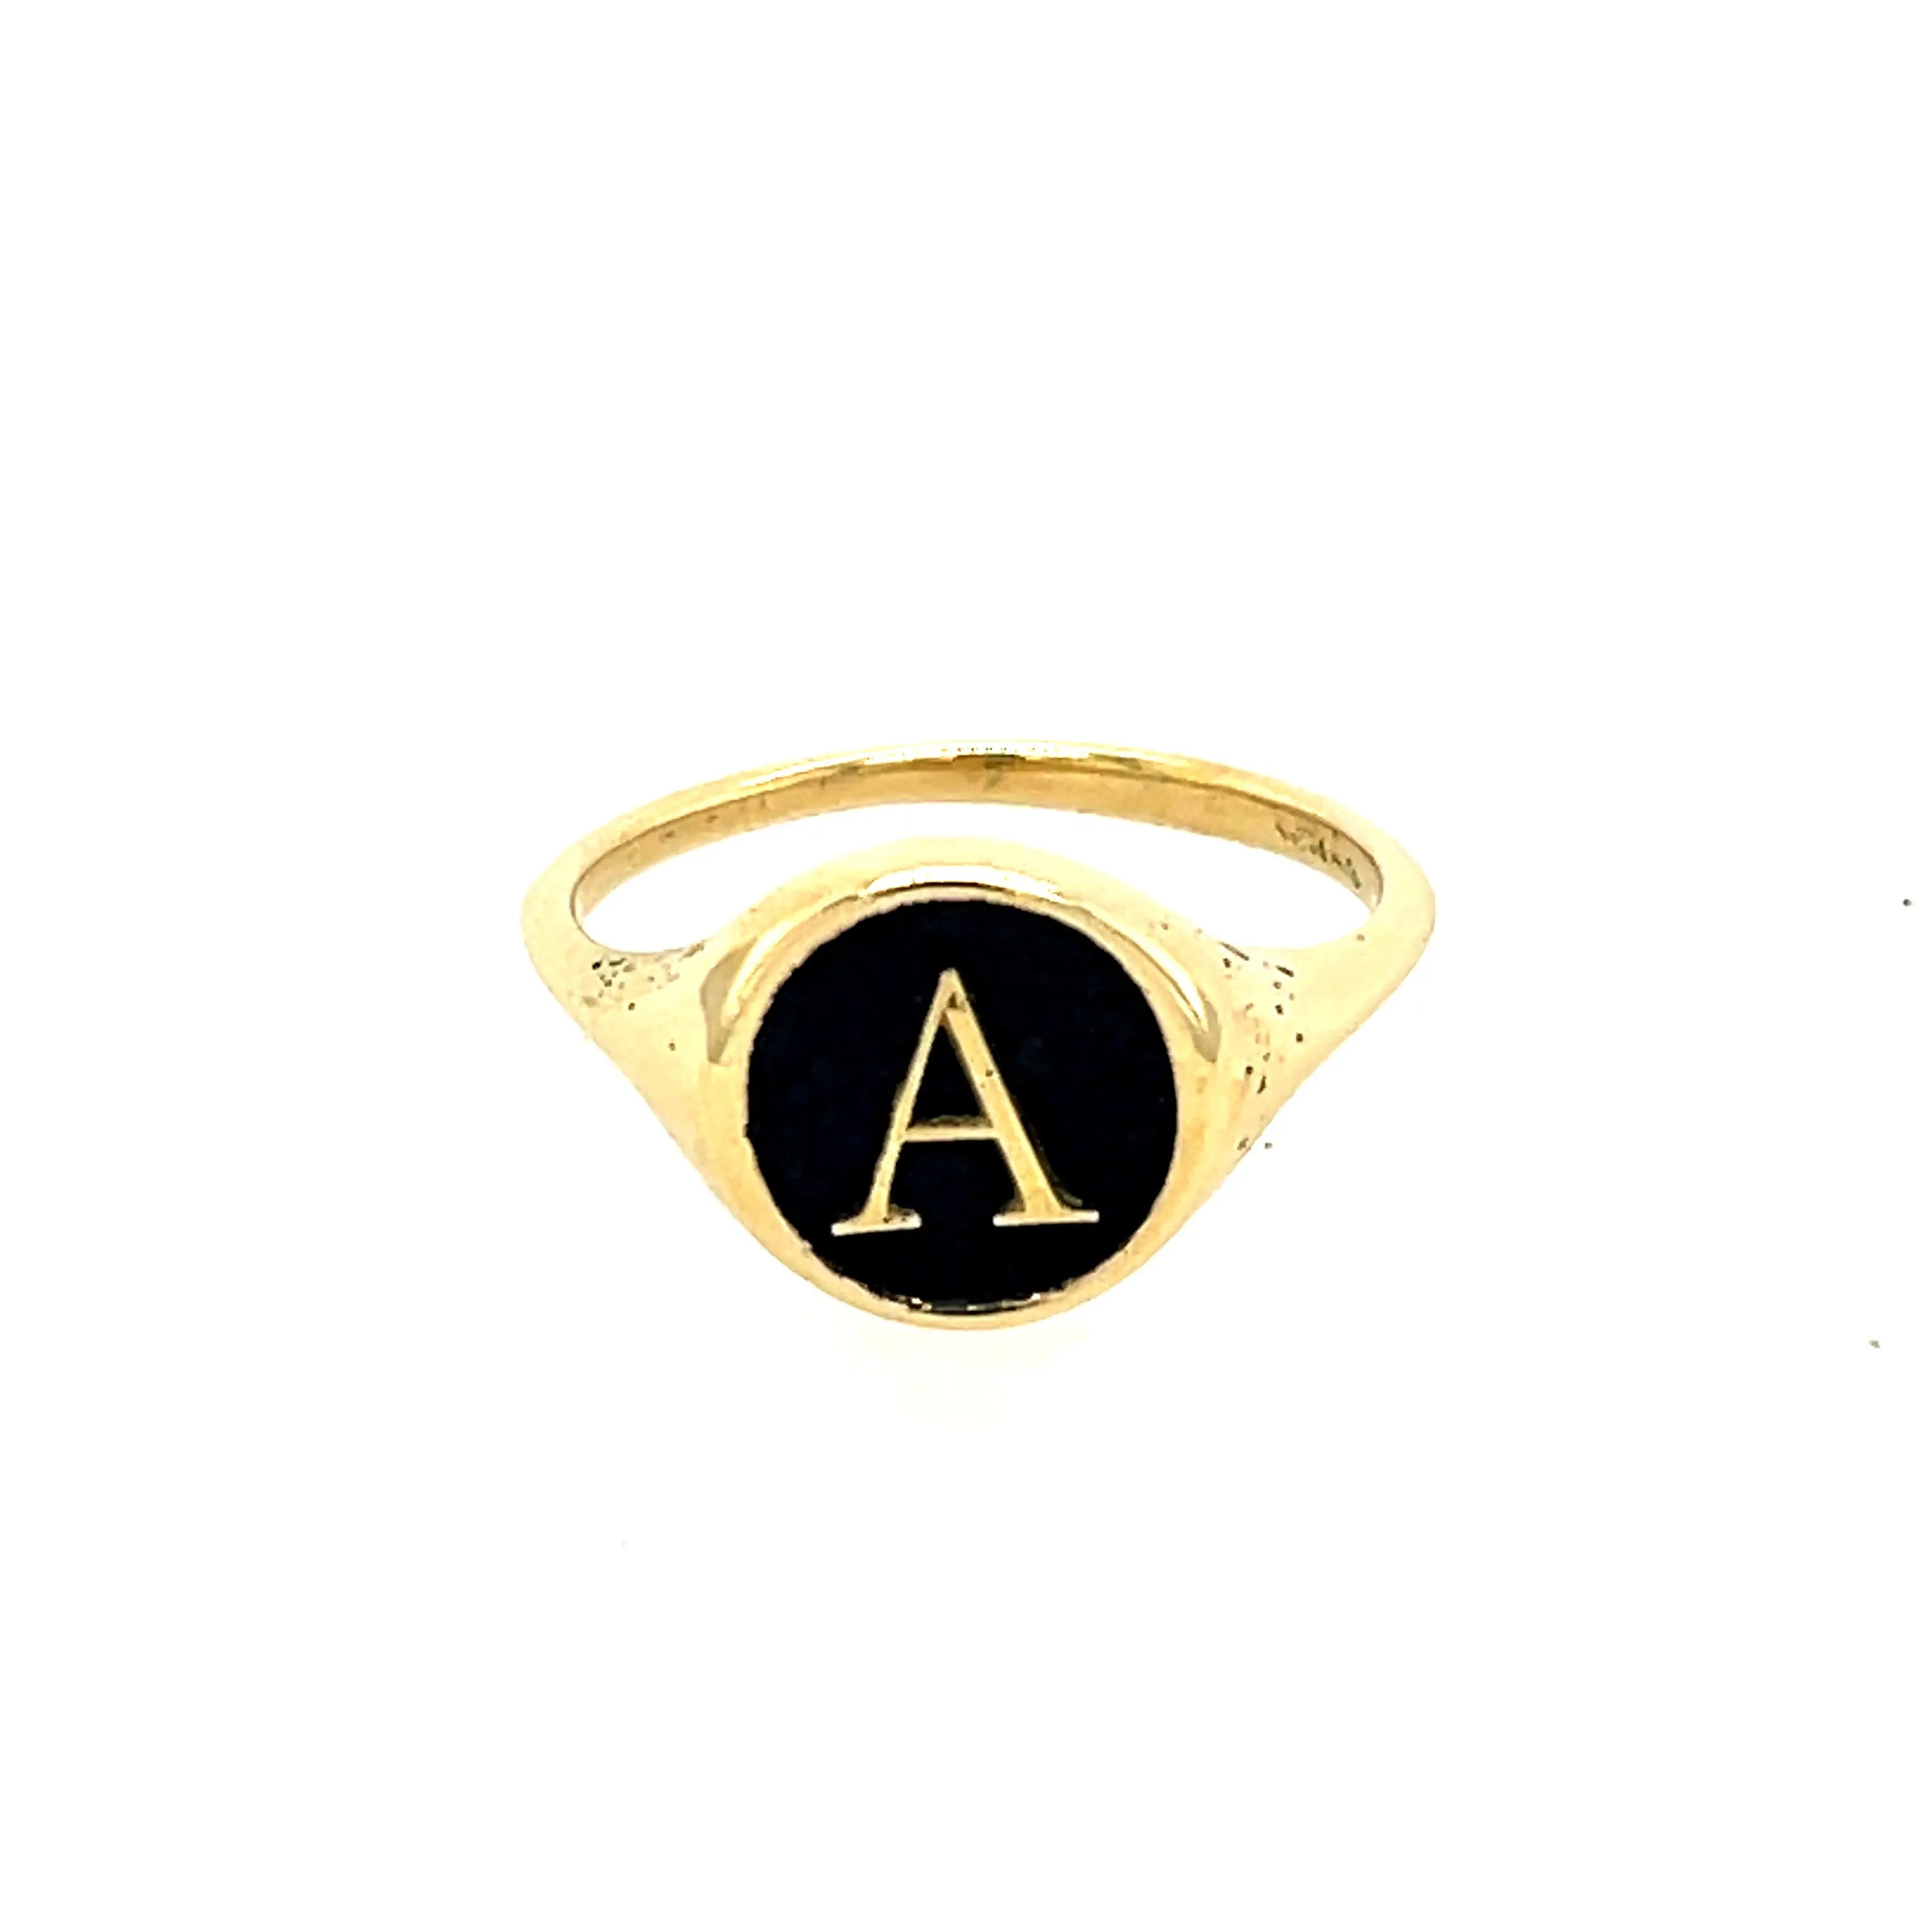 One of a kind terrazzo ring with a small 14k yellow gold letter "A" Alphabet   Ring Size: 6  If you need a different size, please email shop@sbvail.com  Designed by Miles McNeel and made in LA